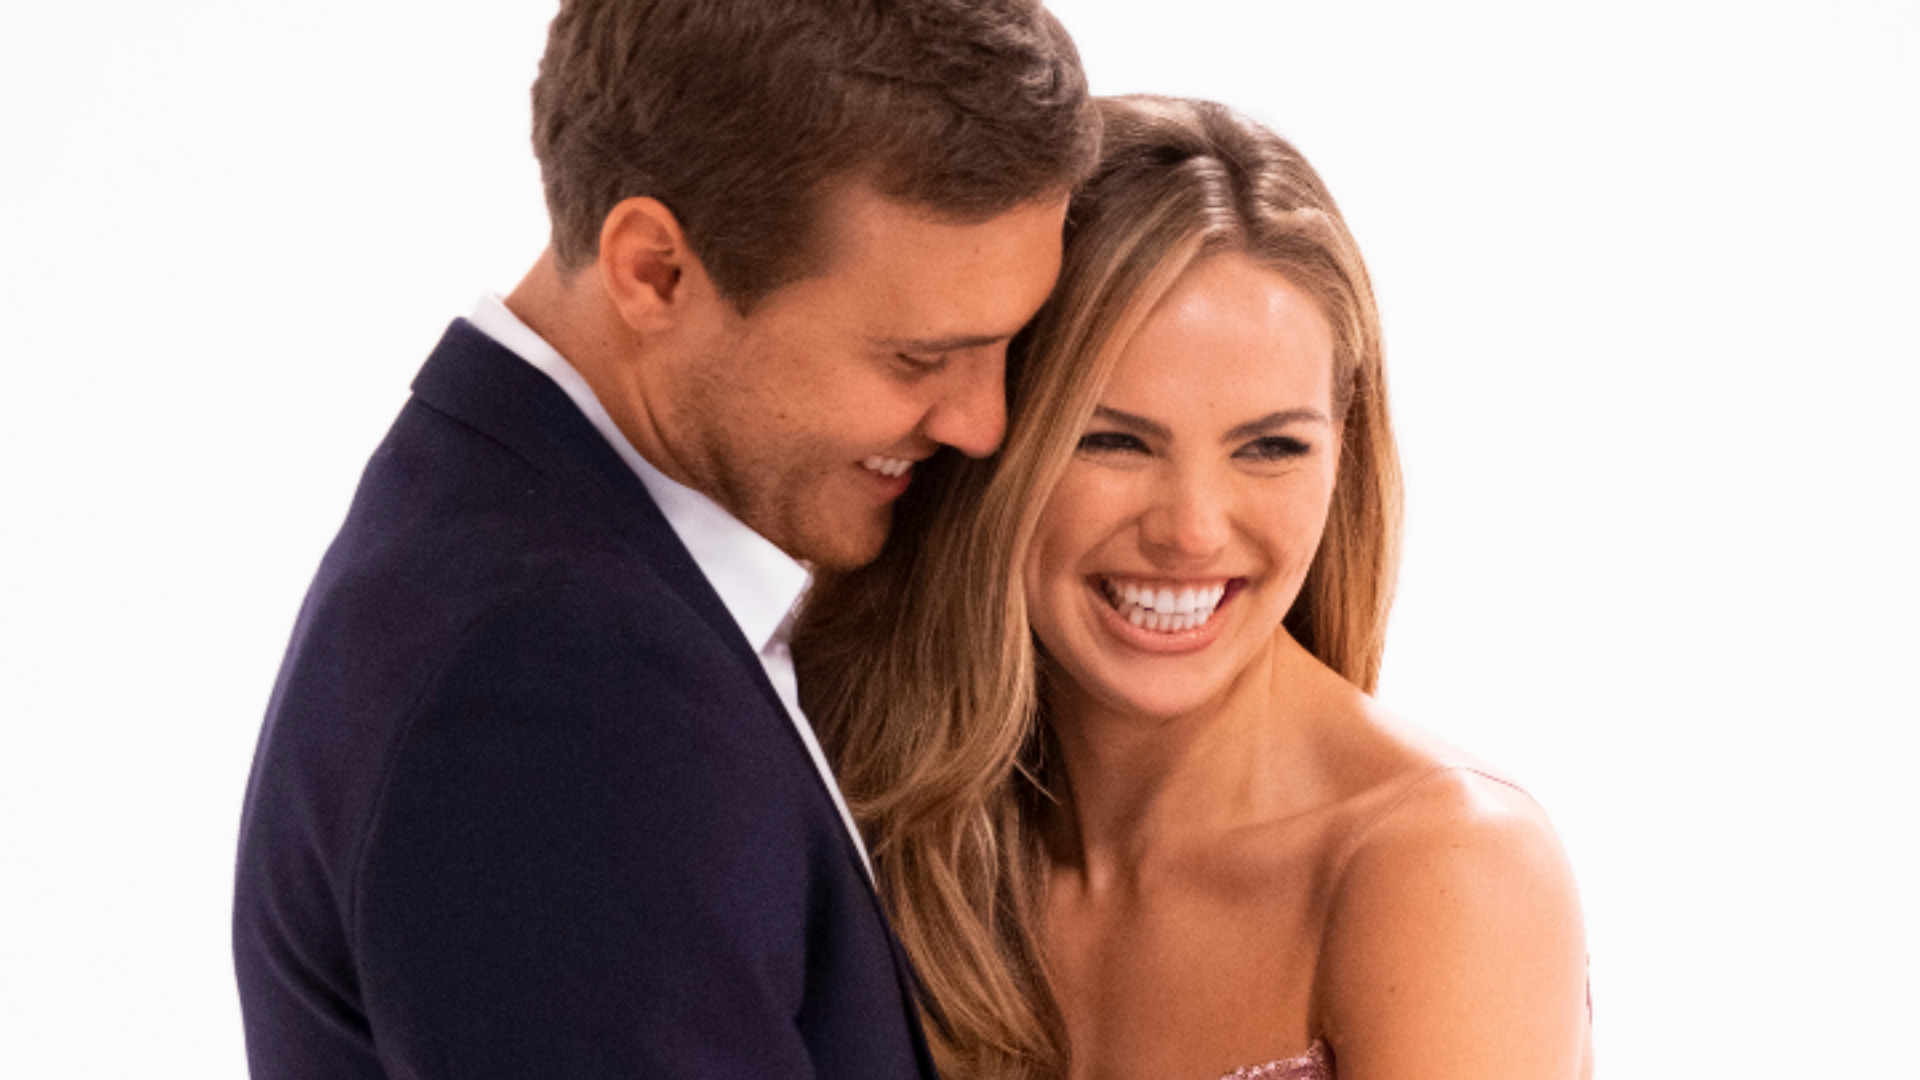 Bachelor Nation stars Peter Weber and Hannah Brown pose together in ‘The Bachelorette’ Season 15 Episode 3